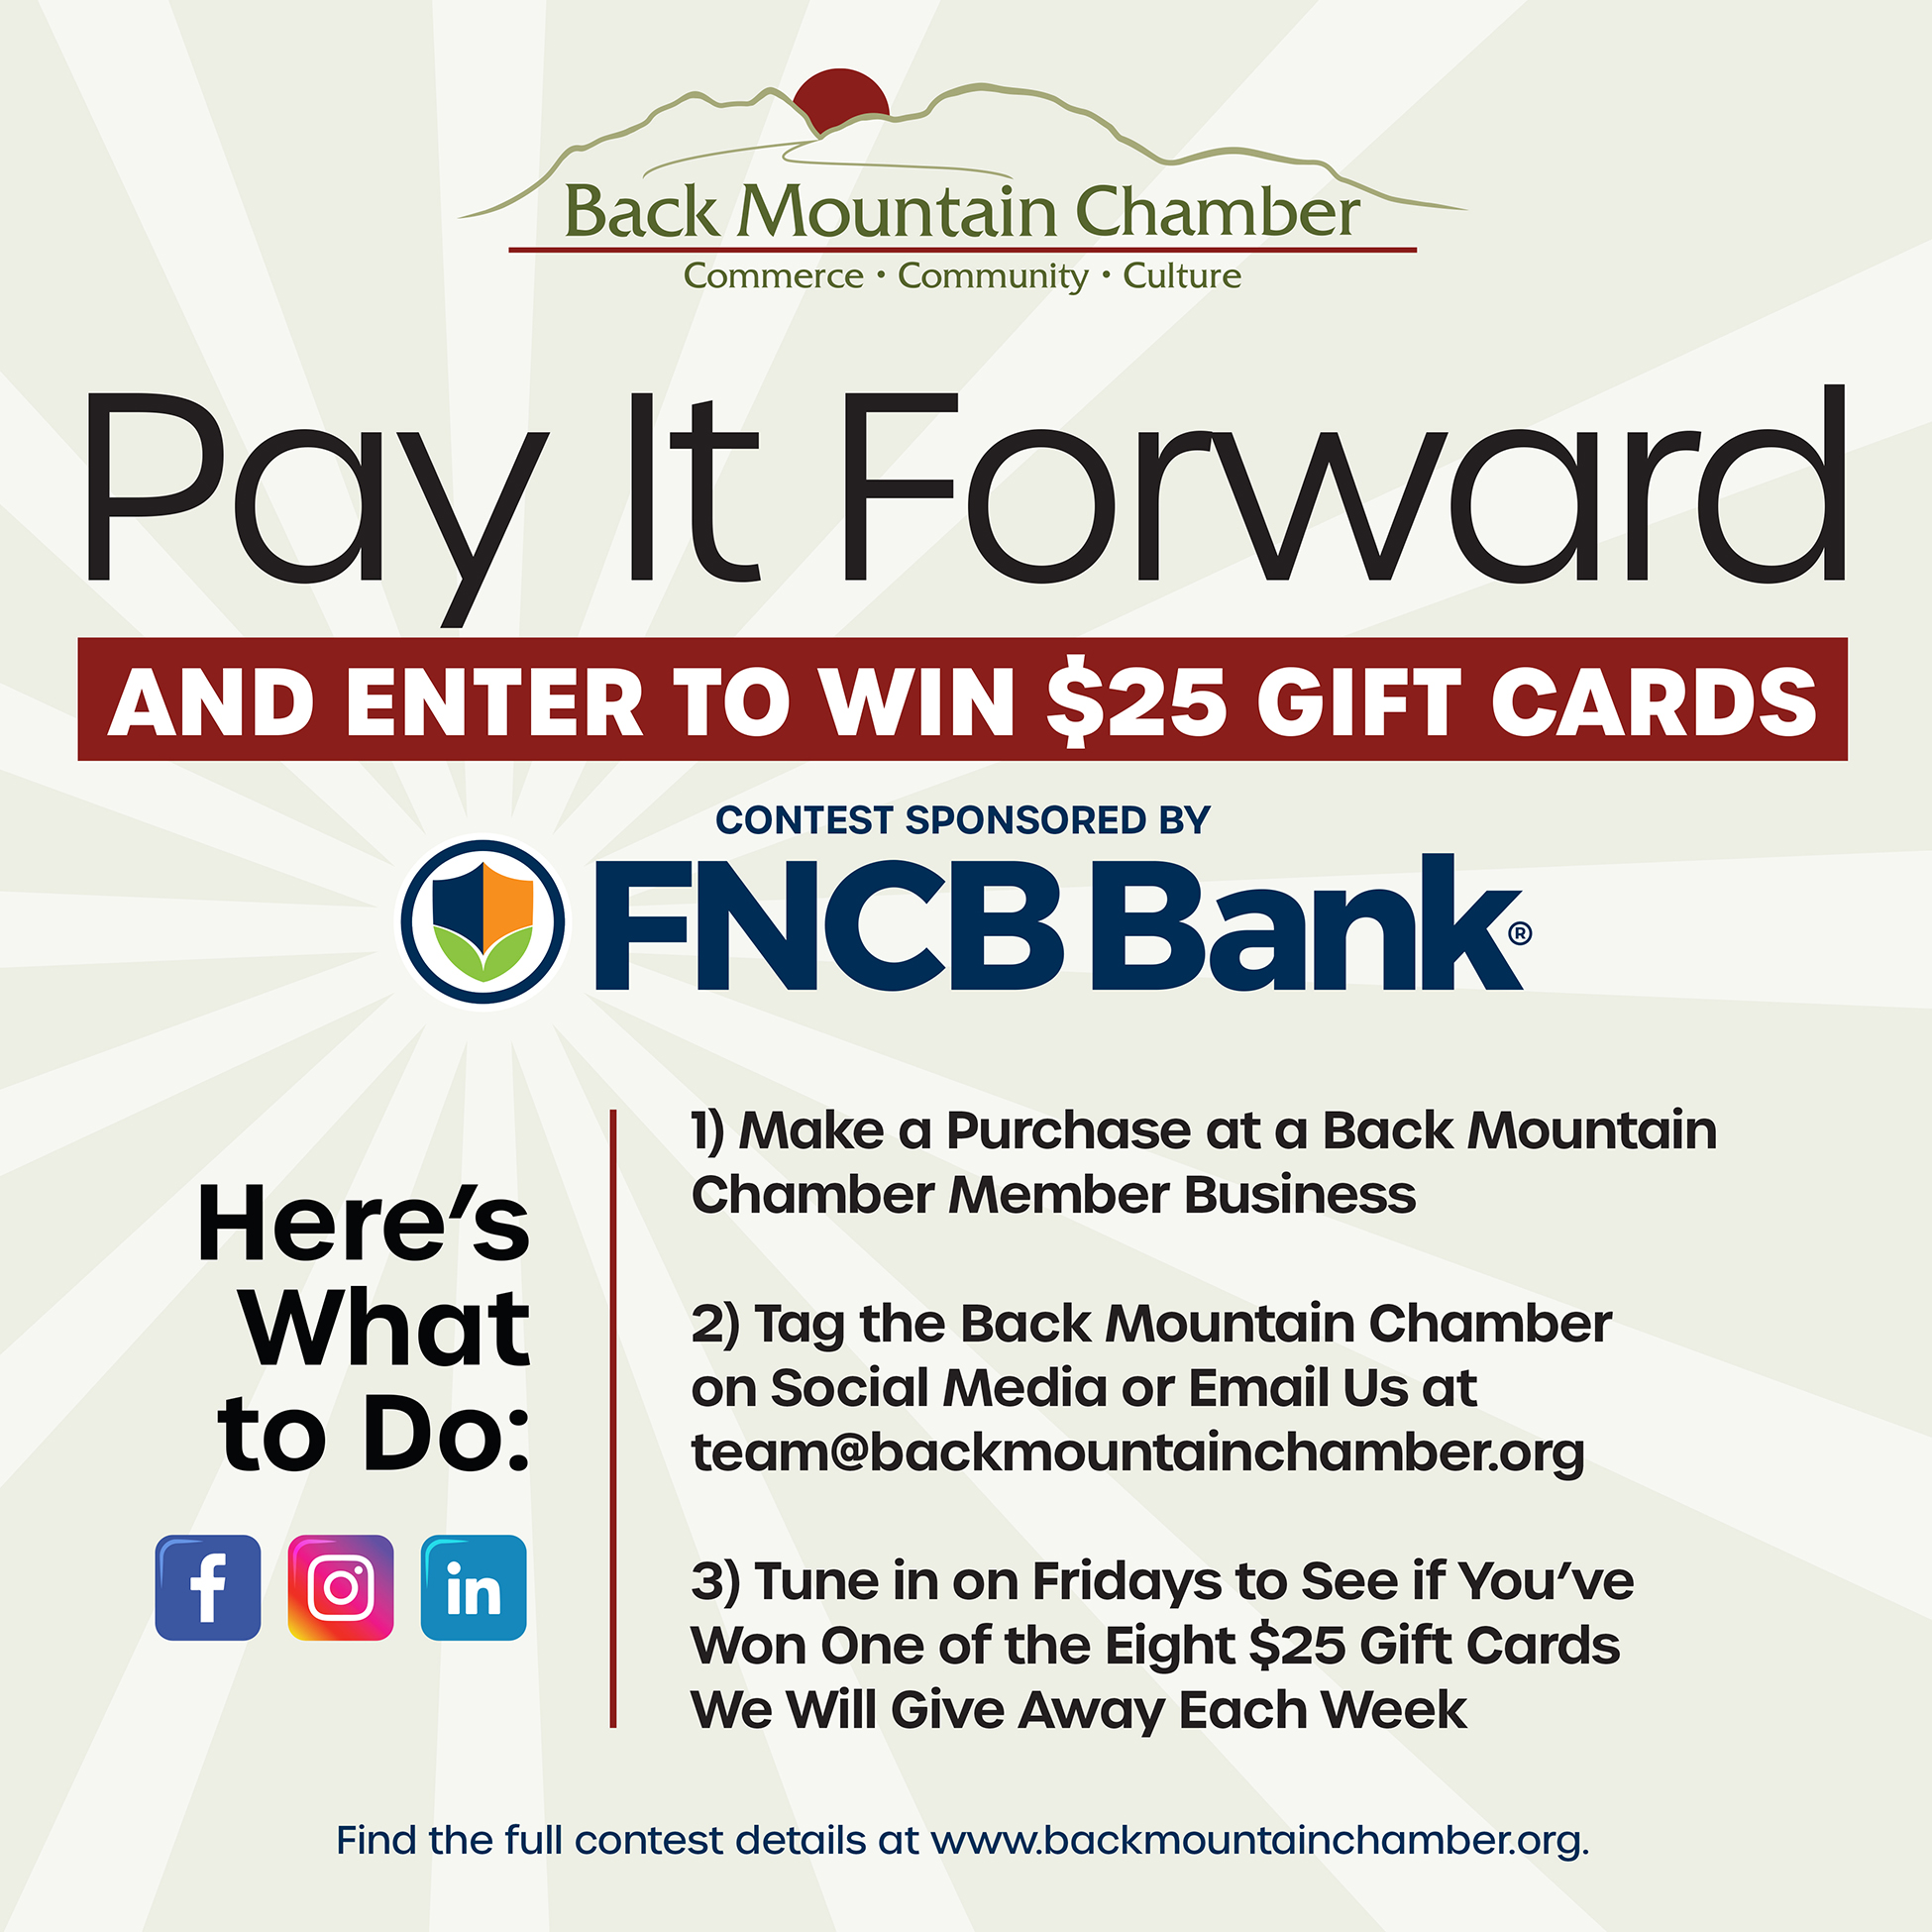 Image for ​Back Mountain Chamber's Pay It Forward Contest Sponsored by FNCB Bank